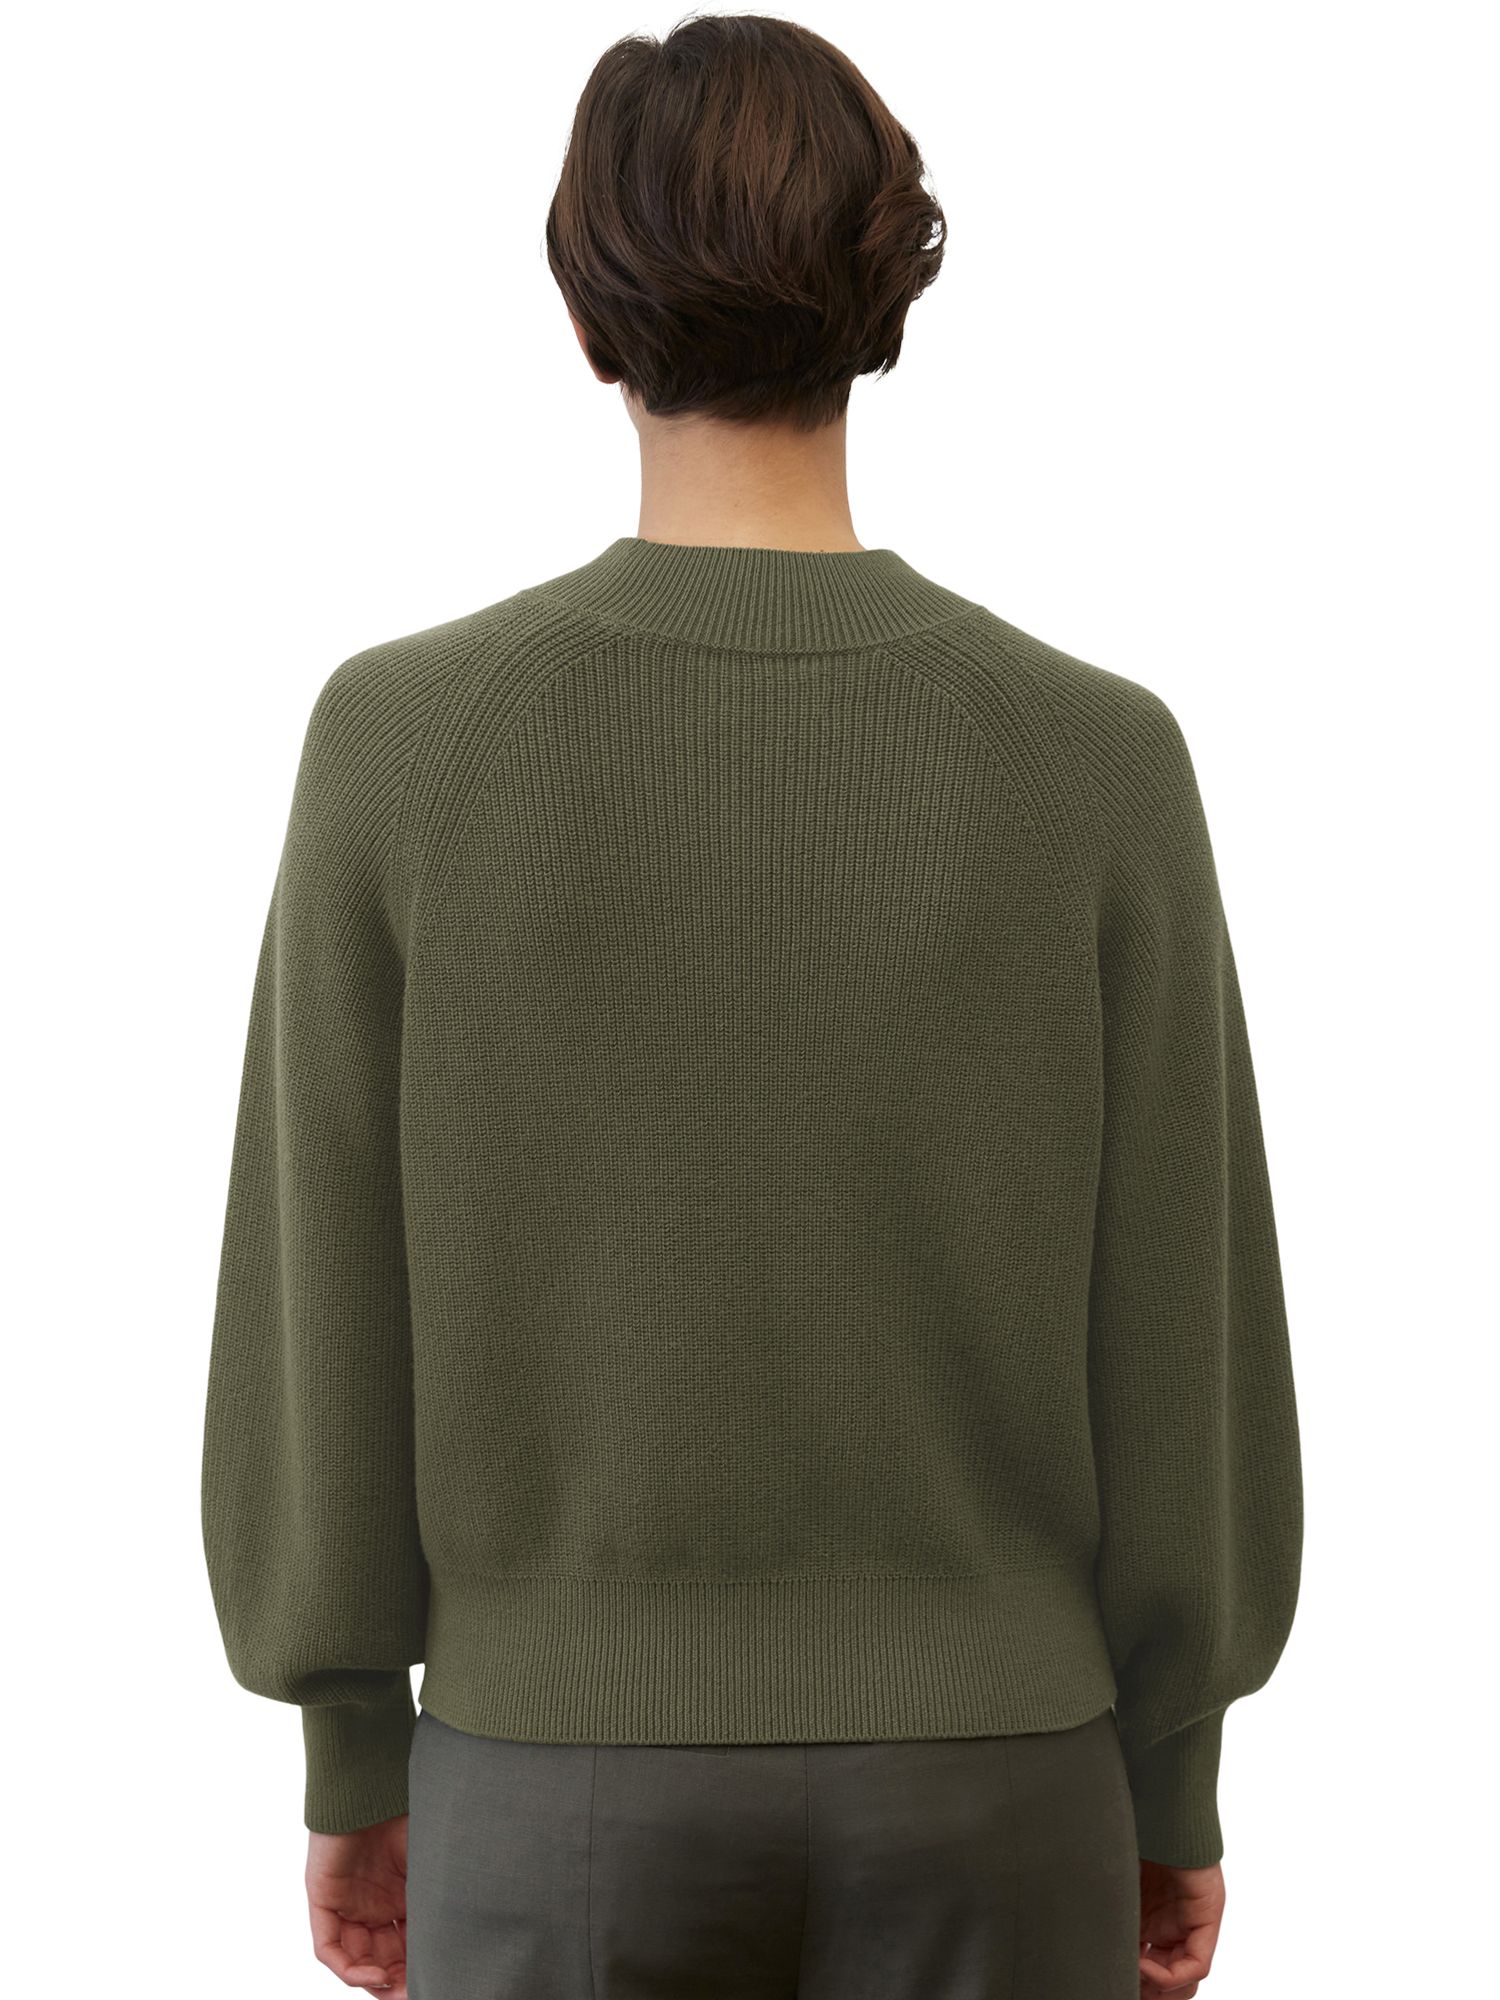 Buy Marc O'Polo Cropped Knitted Jumper Online at johnlewis.com